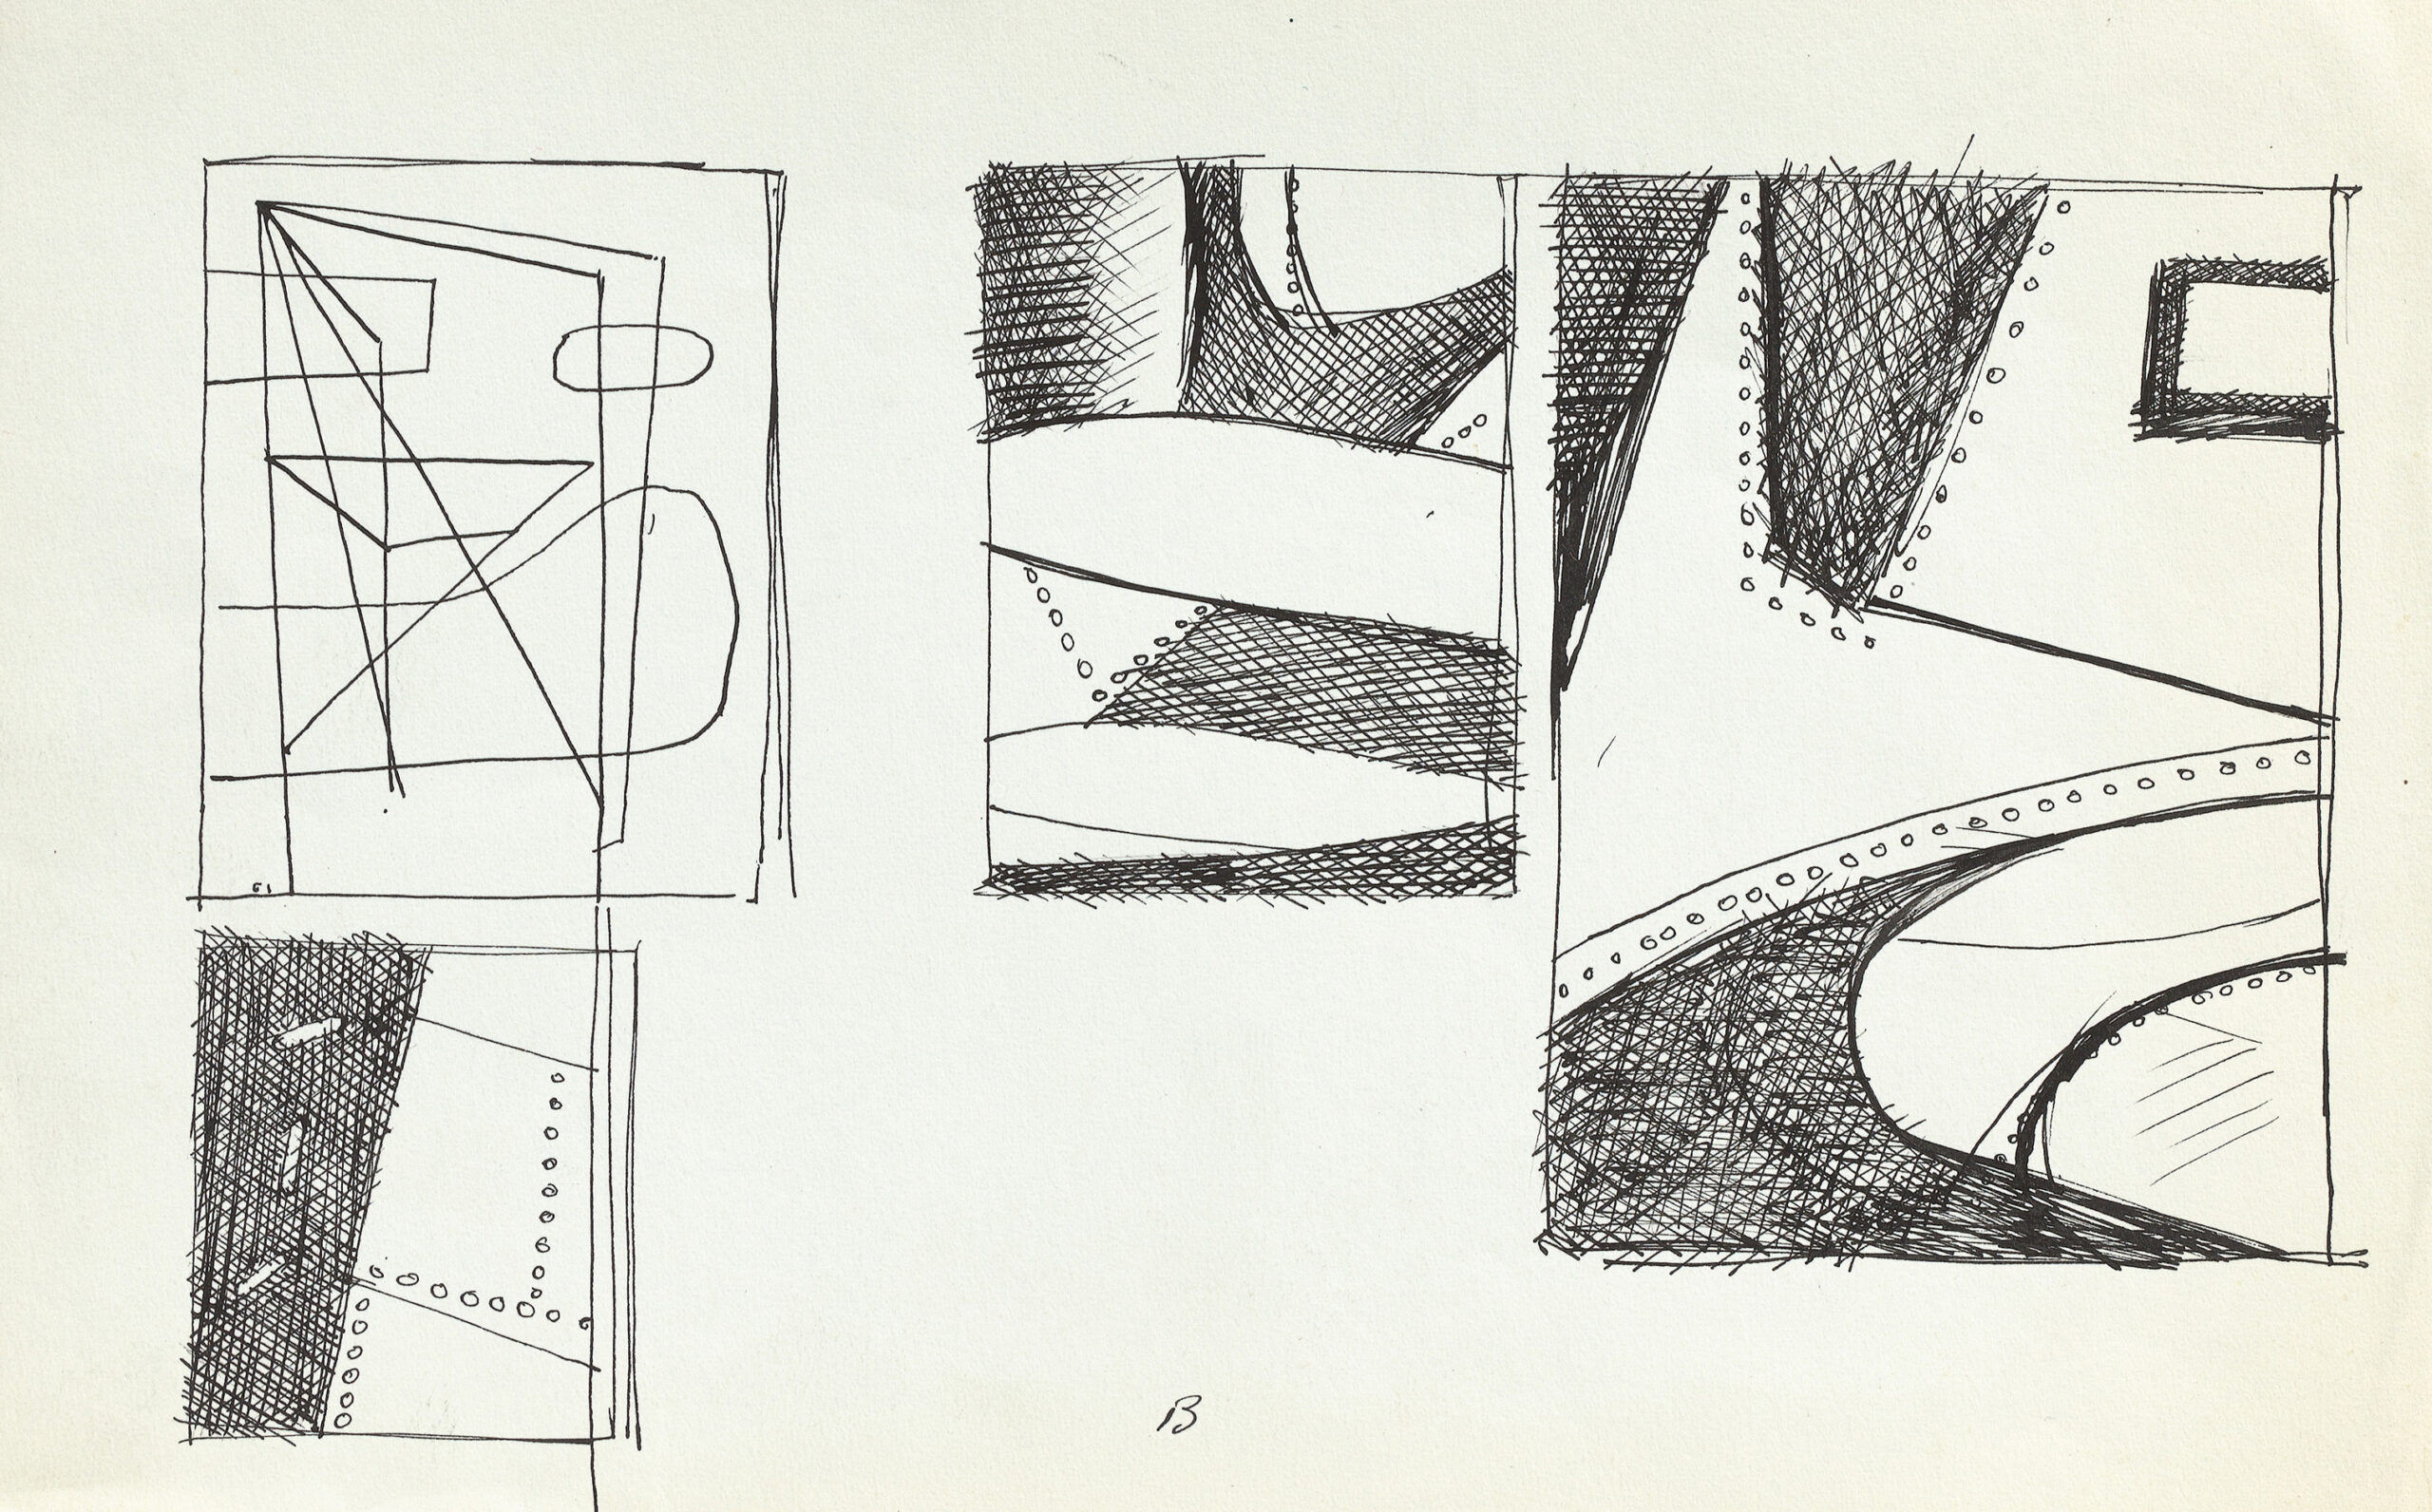 Four abstracted ink studies of plane parts featuring rivet detailing.